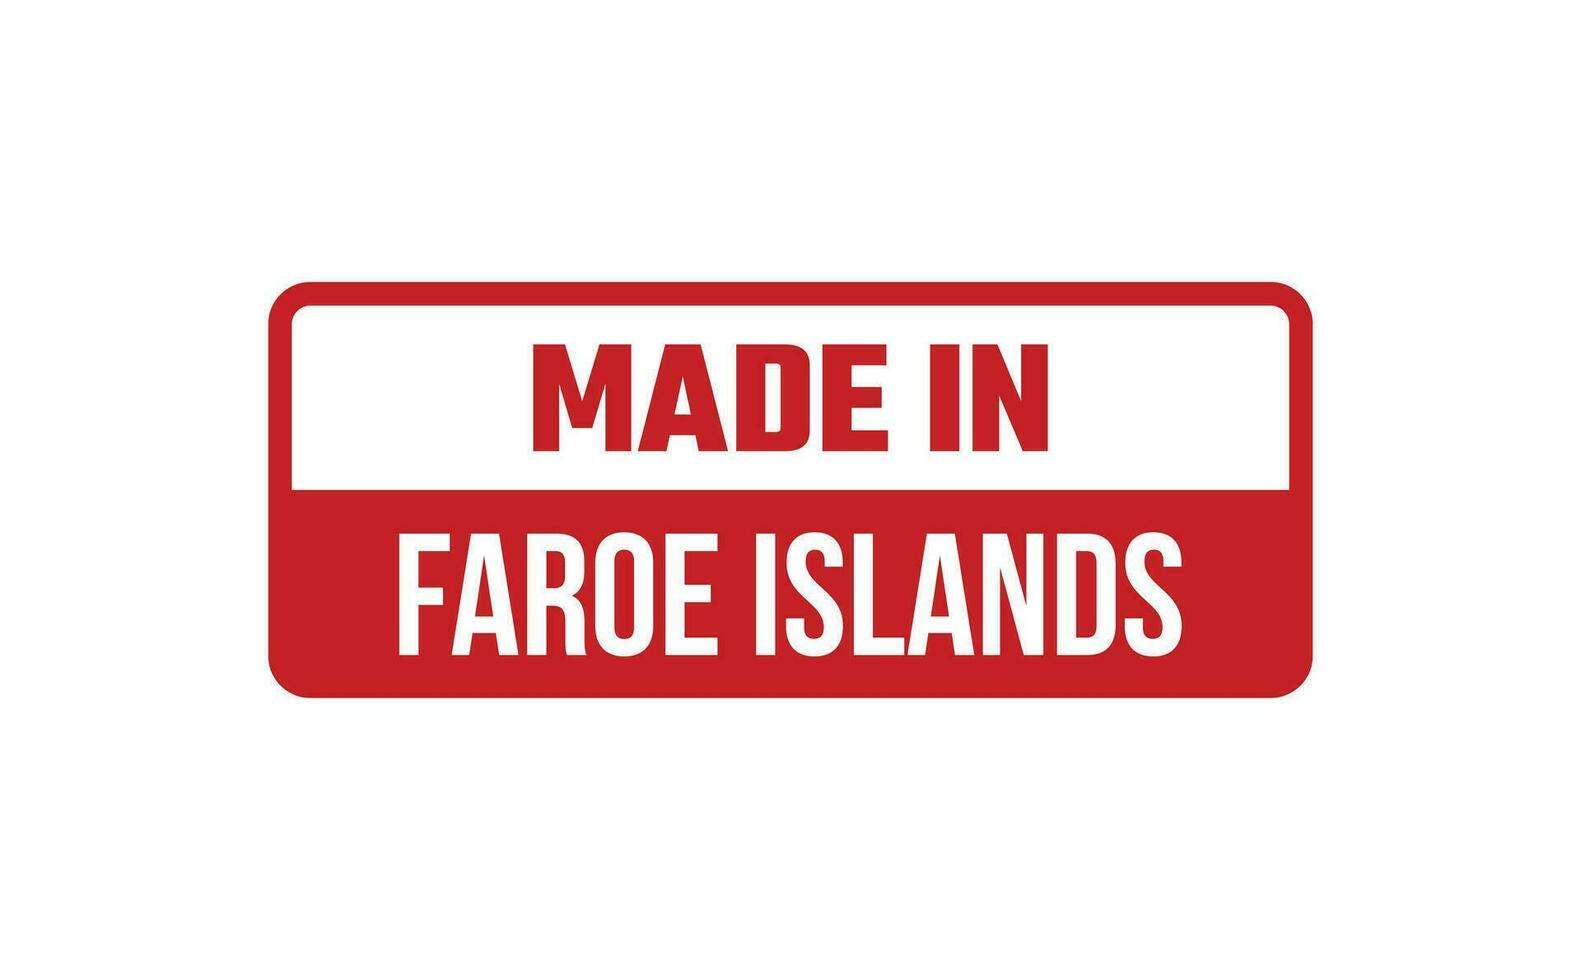 Made In Faroe Islands Rubber Stamp vector